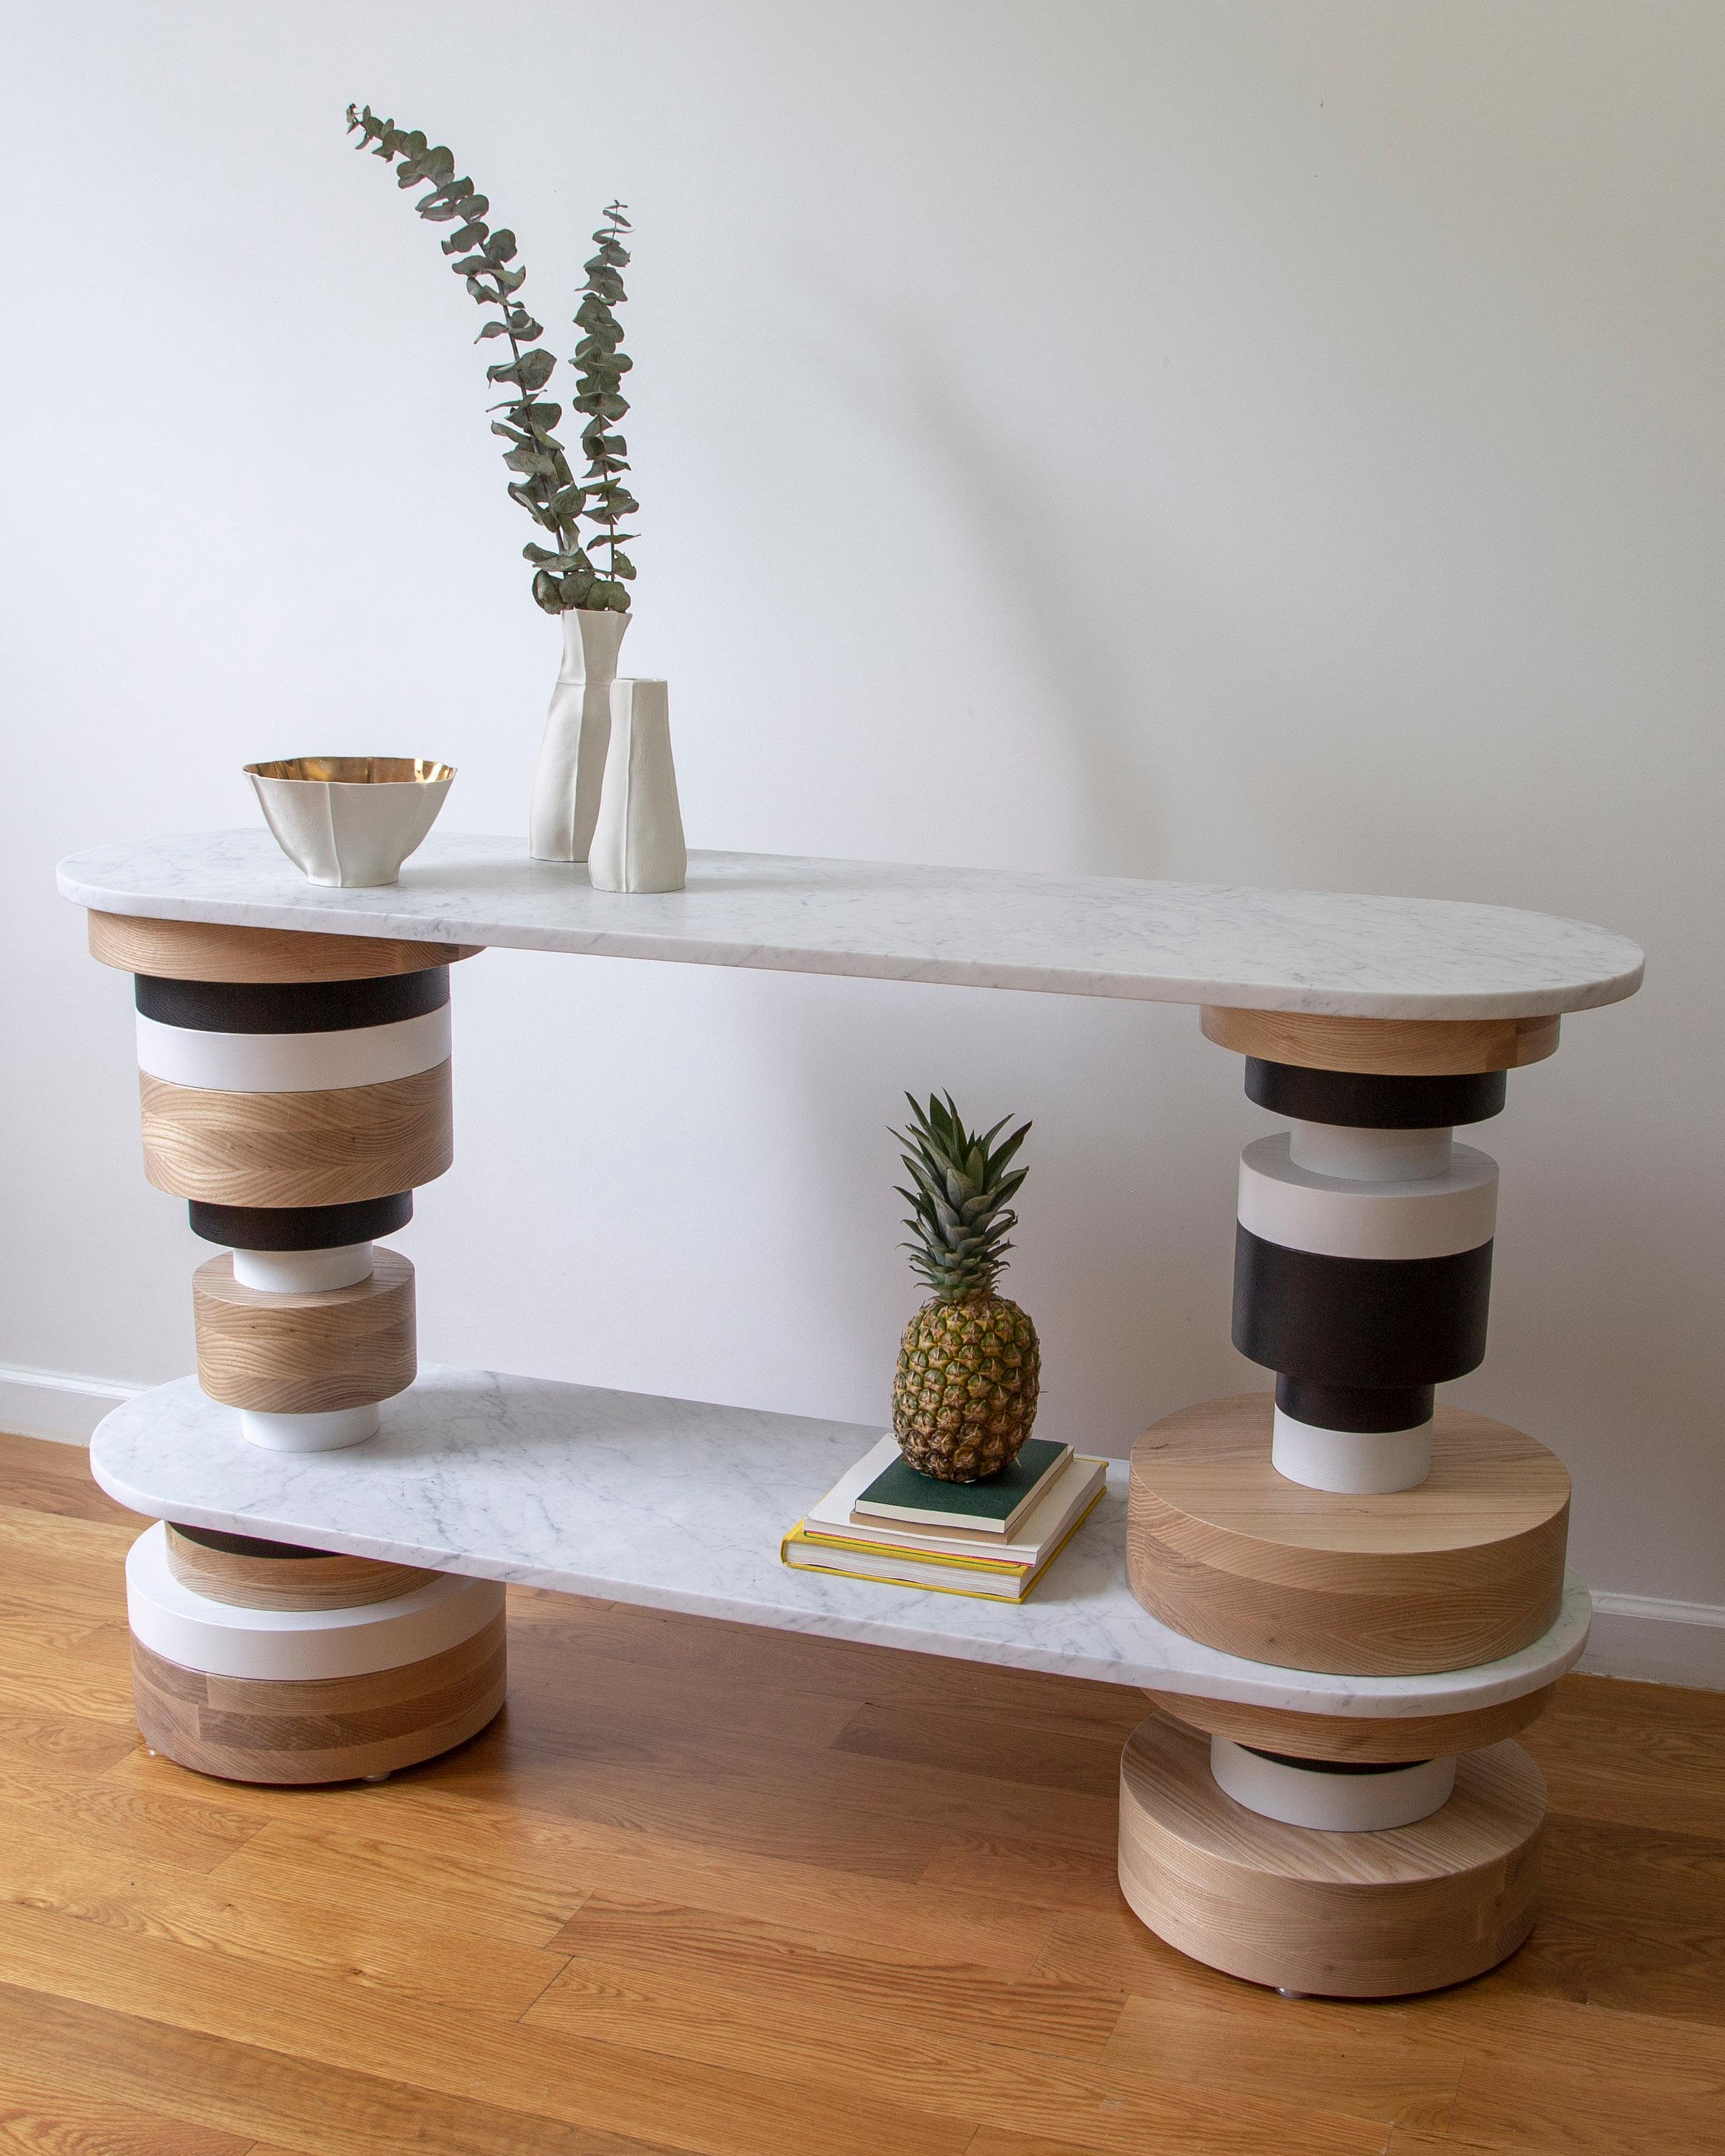 The Sottsass-inspired “Sass Console Table” is a bold, graphic statement piece. A honed Carrara marble top sits on an Amish-made base composed of painted and stacked wood circles. Made to order.

The version as shown is 32.5